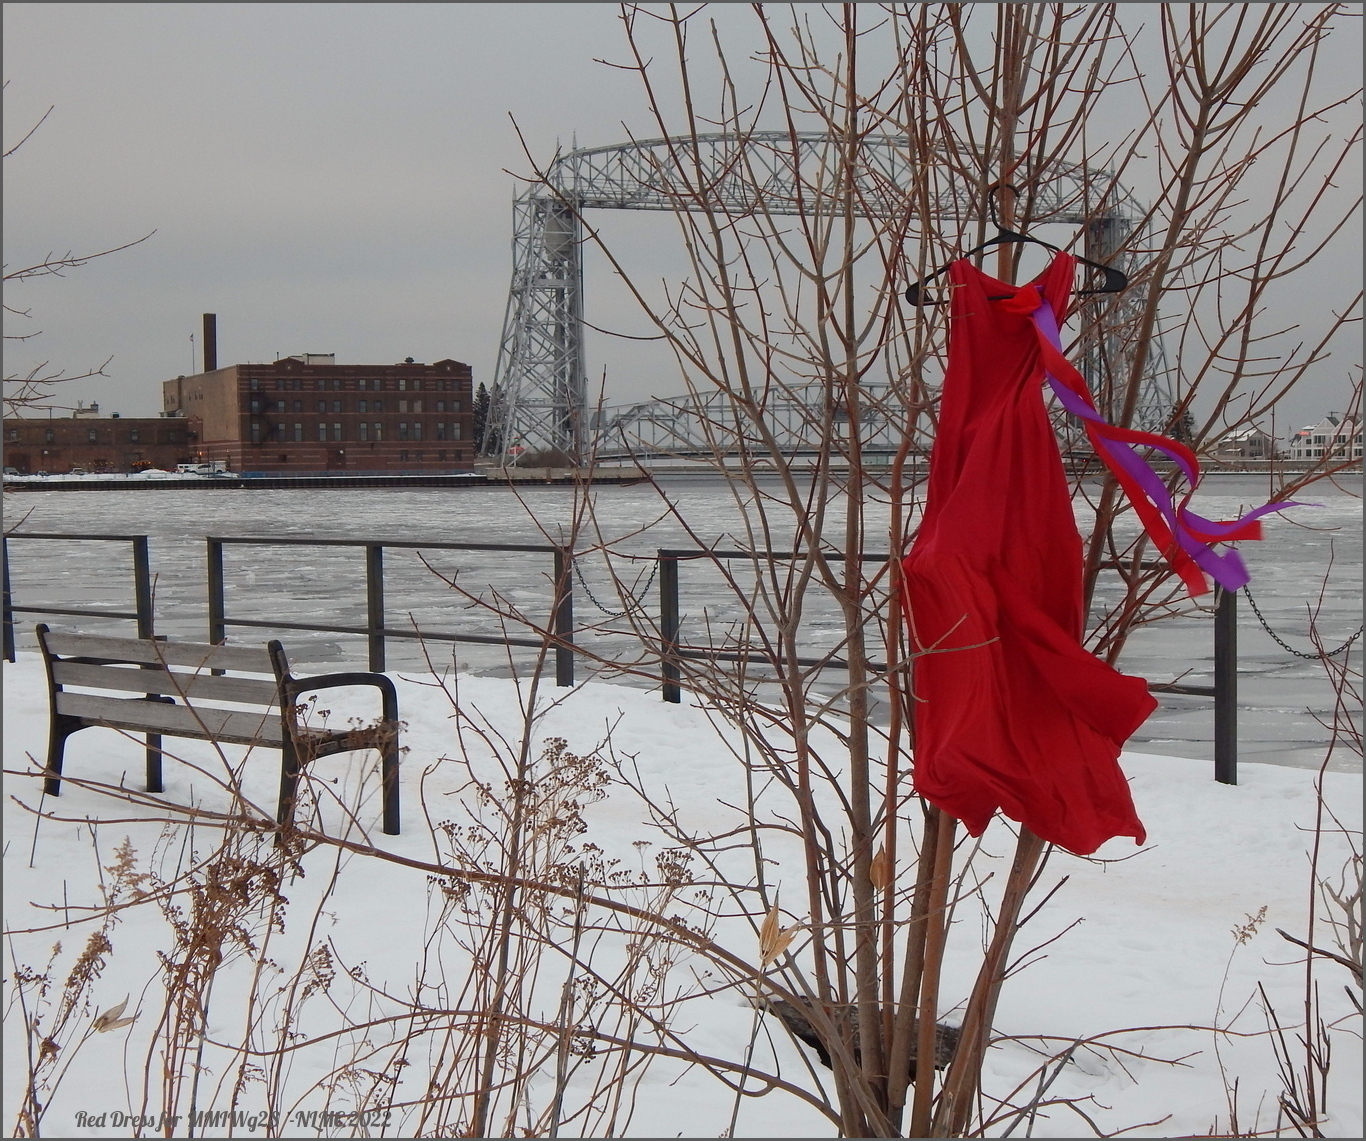 Red Dress Campaign MMIW, Duluth MN. A campaign to bring awareness and commemorate the epidemic of missing and murdered Indigenous women.